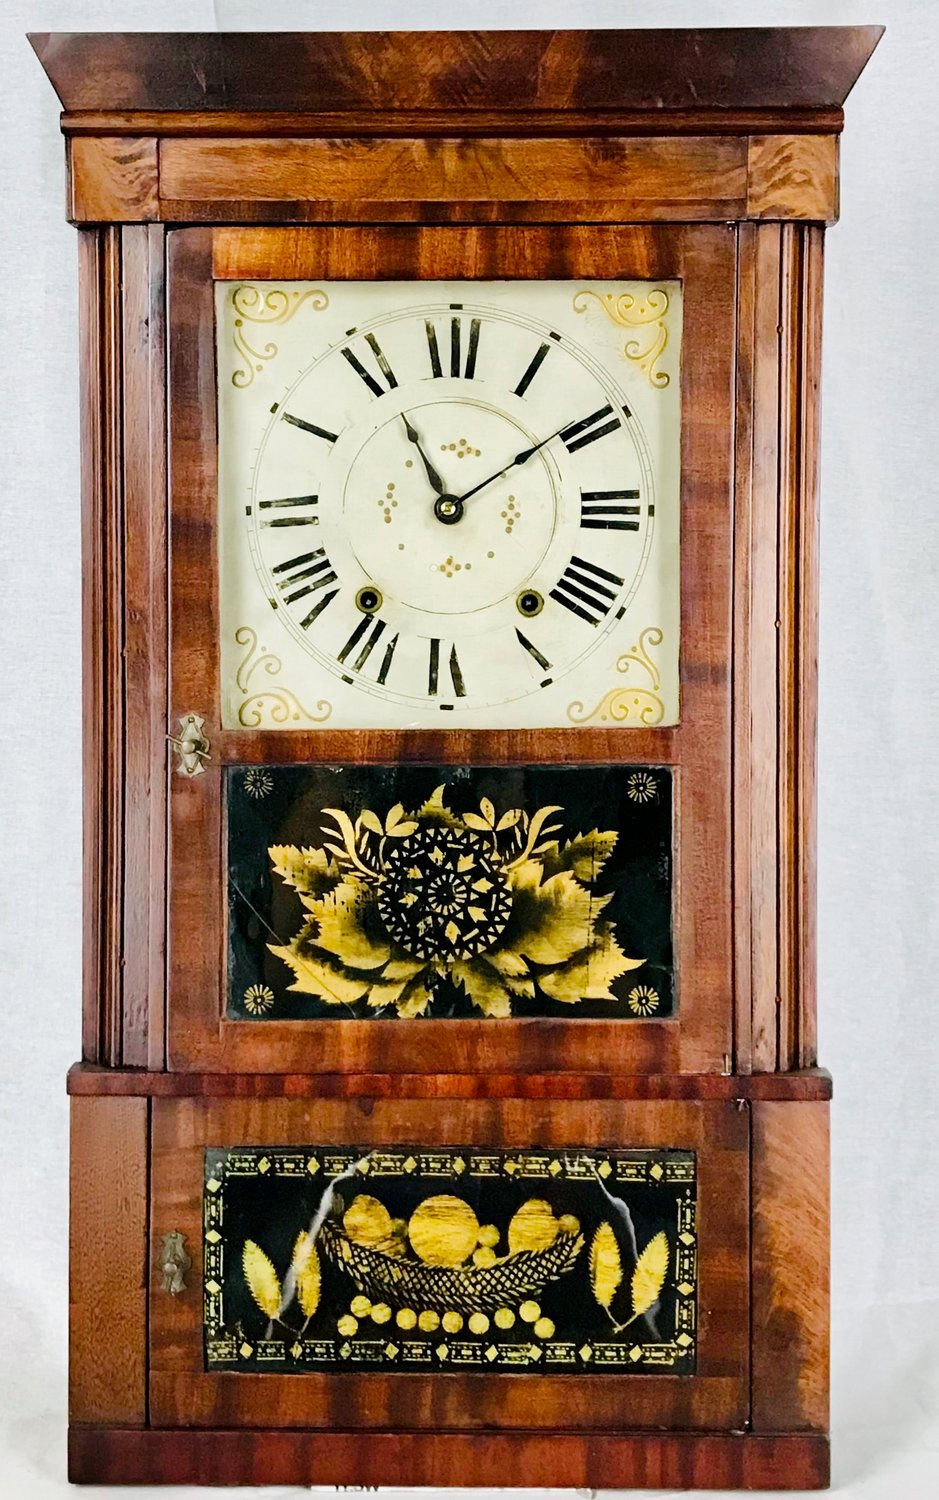 RURAL ROOTS — Clocks made in Madison County in the mid 1800s will be on display at the Madison County Historical Society from Nov. 1 to Dec. 19. The owner of the collection, Russell Oechsle, will be offering guided tours on Nov. 21 and 28 at 1 p.m. and Dec. 12 and 19 at 1 p.m.